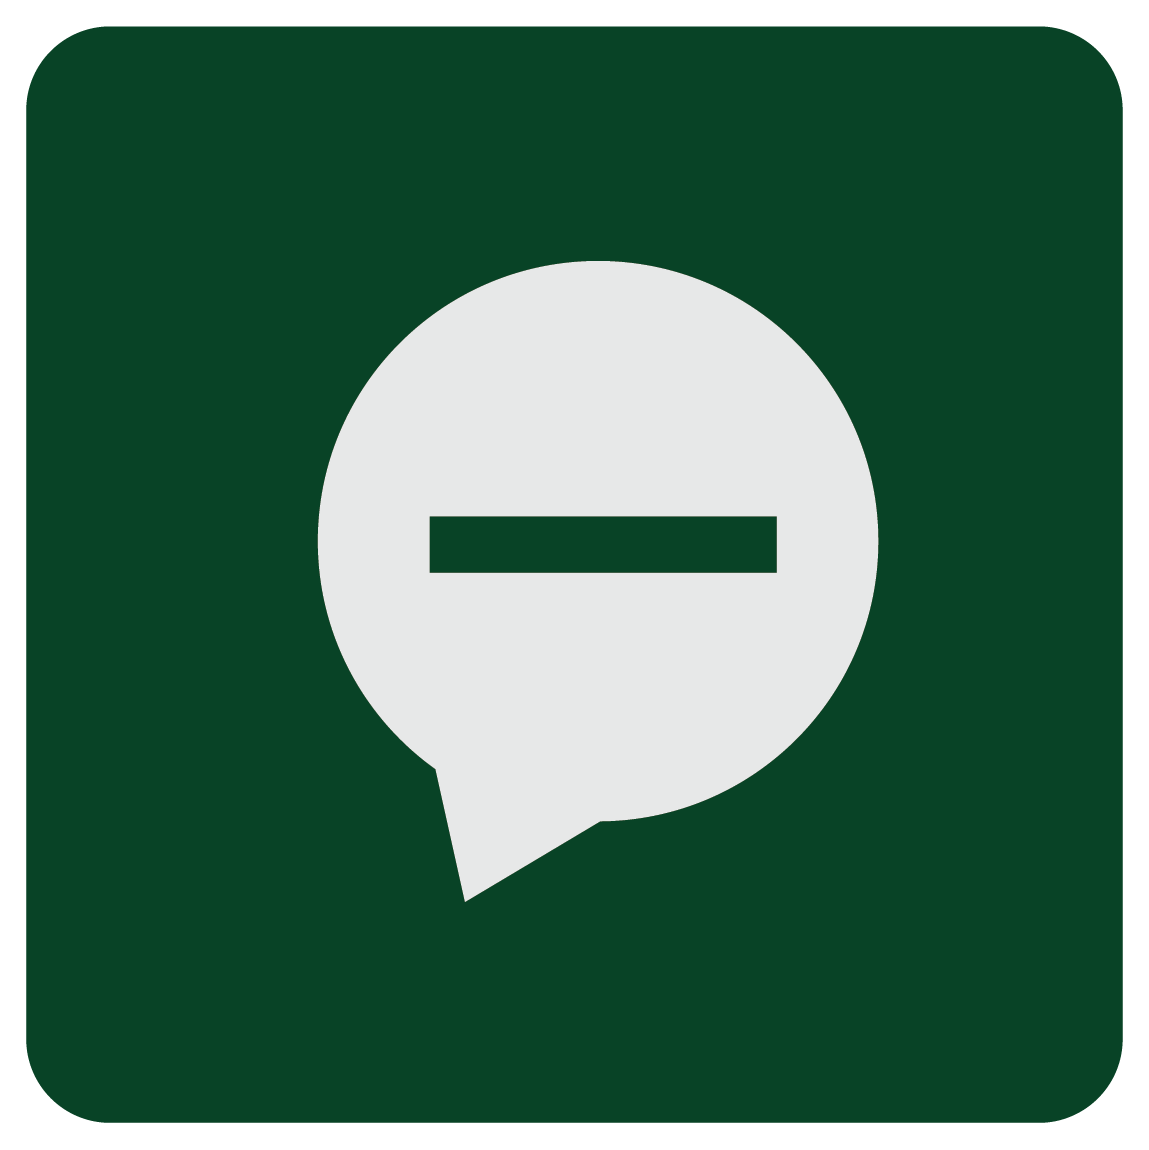 A green square with a white speech bubble with a minus sign inside of it.